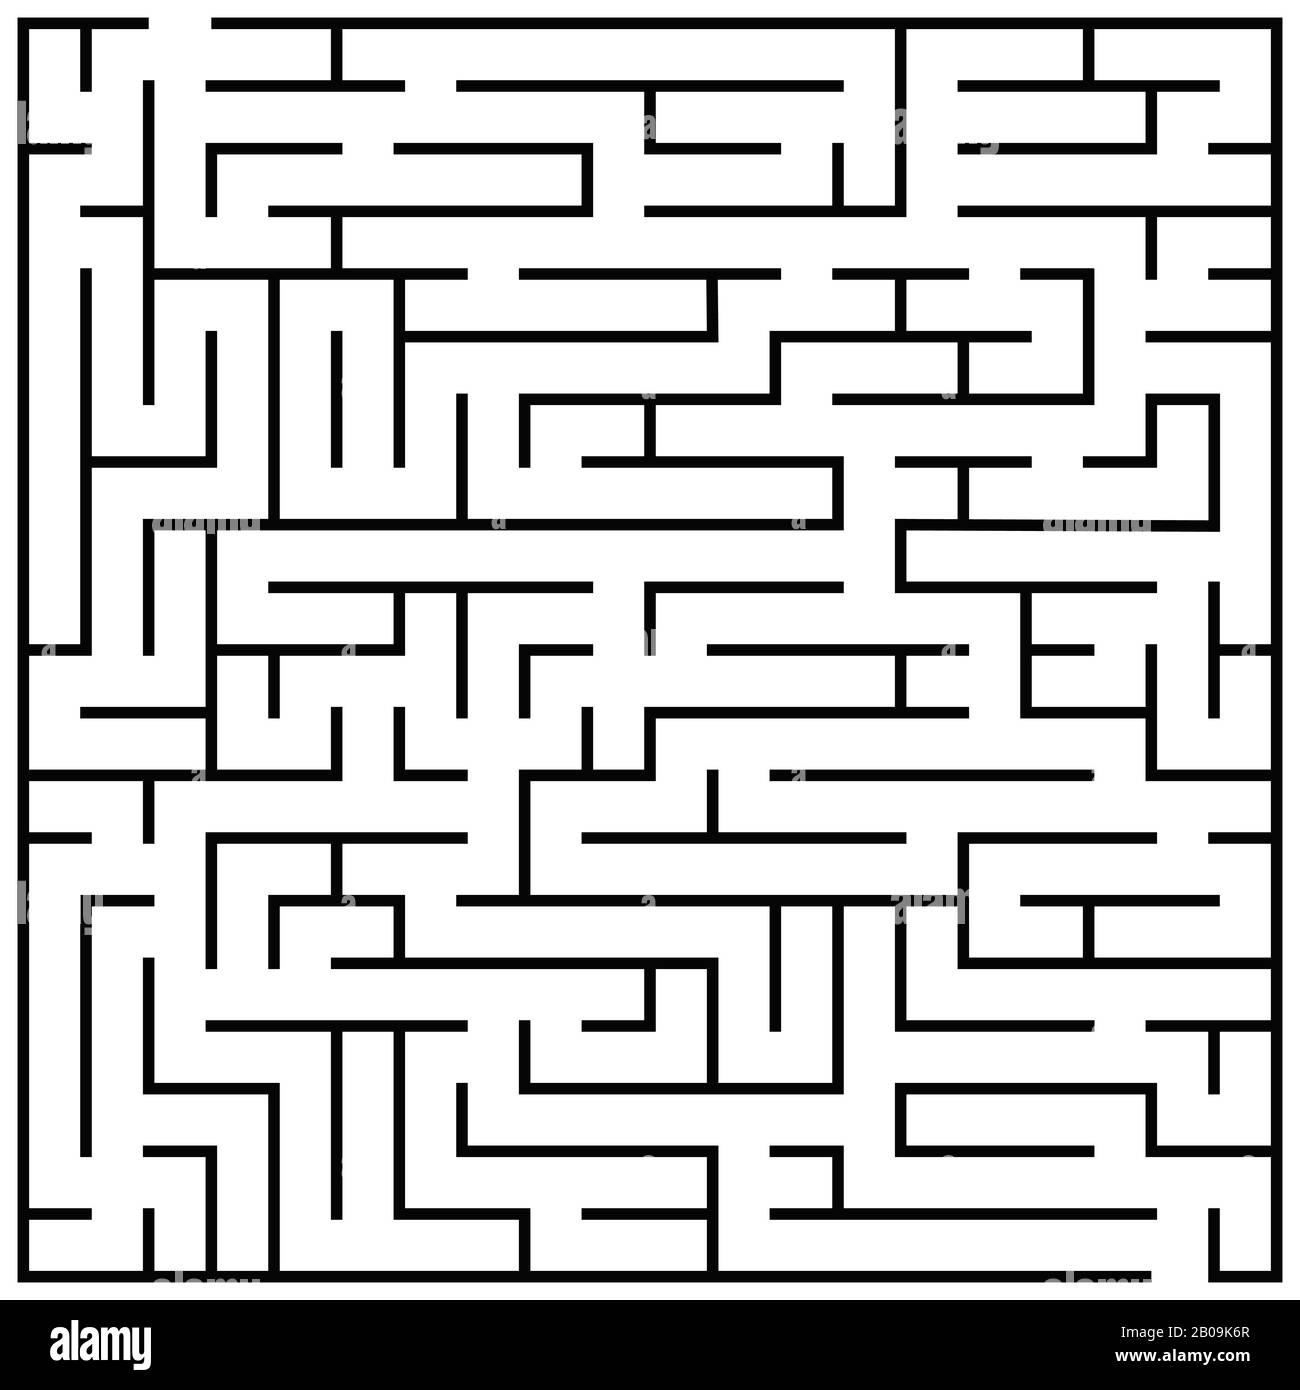 Feed the Dog Puzzle- unusual & challenging maze puzzle